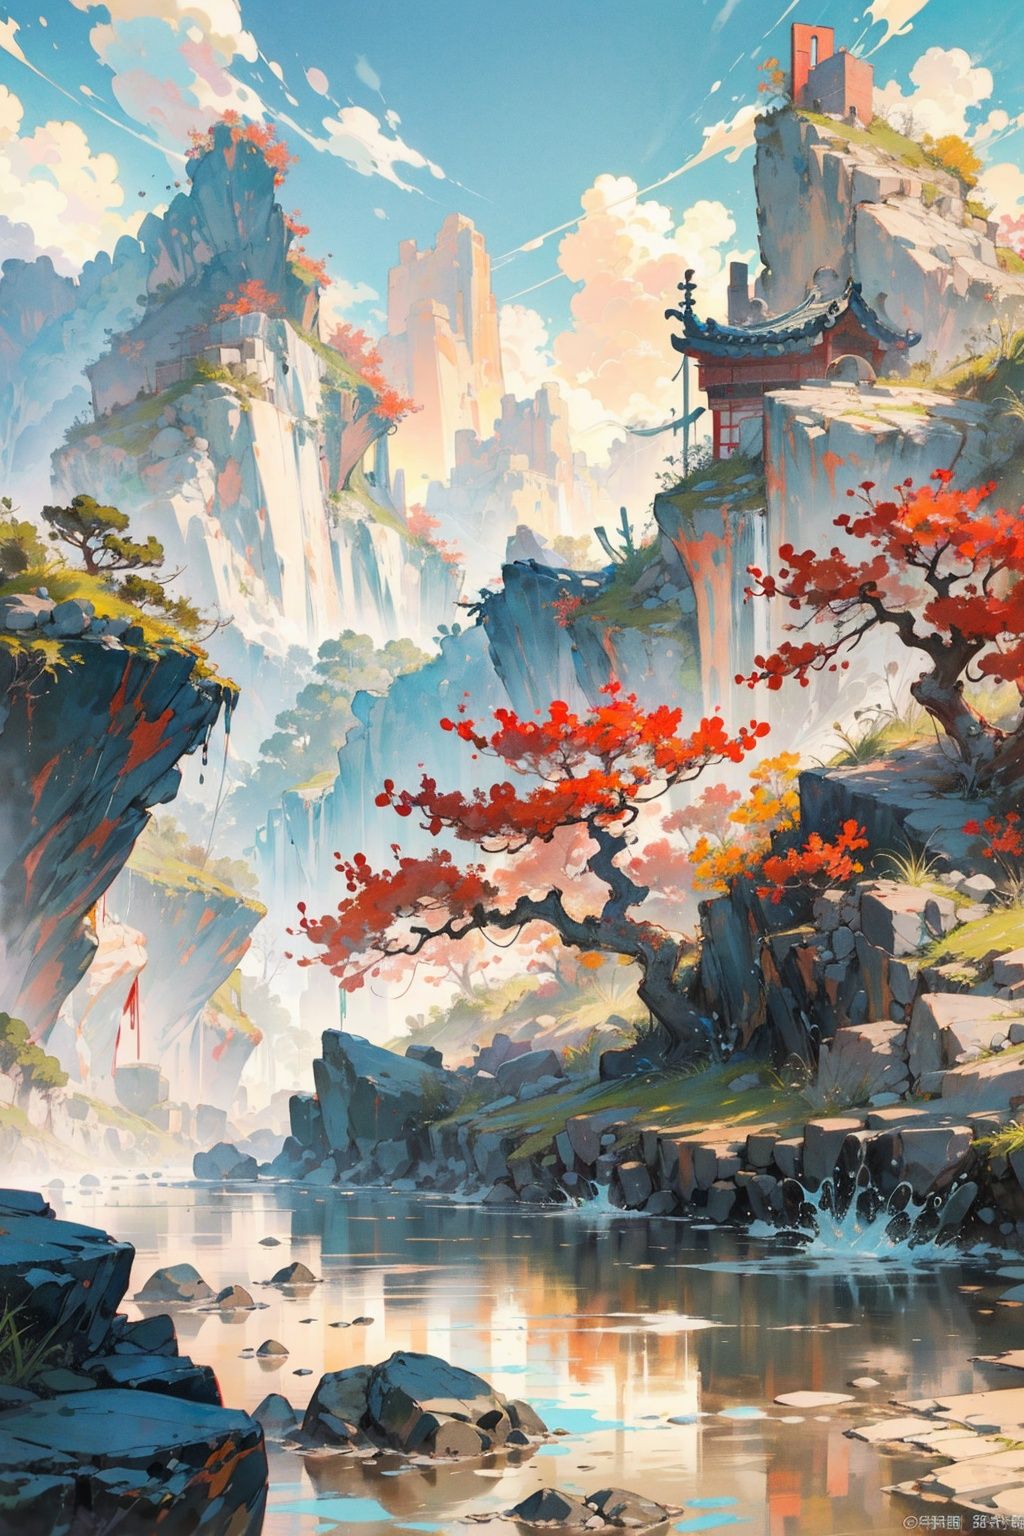  Best quality,8k,cg,
Masterpiece, high quality, best quality, official art, beauty and aesthetics: 1.2), milk tea cup, red stone surround, splash spray, (Chinese landscape paper carving, Chinese Song Dynasty landscape painting: 1.2), (surrealist dream style), cream organic fluid, ray tracing, environmental shielding, hazy, natural light, limestone, gel resin sheet, oc rendering